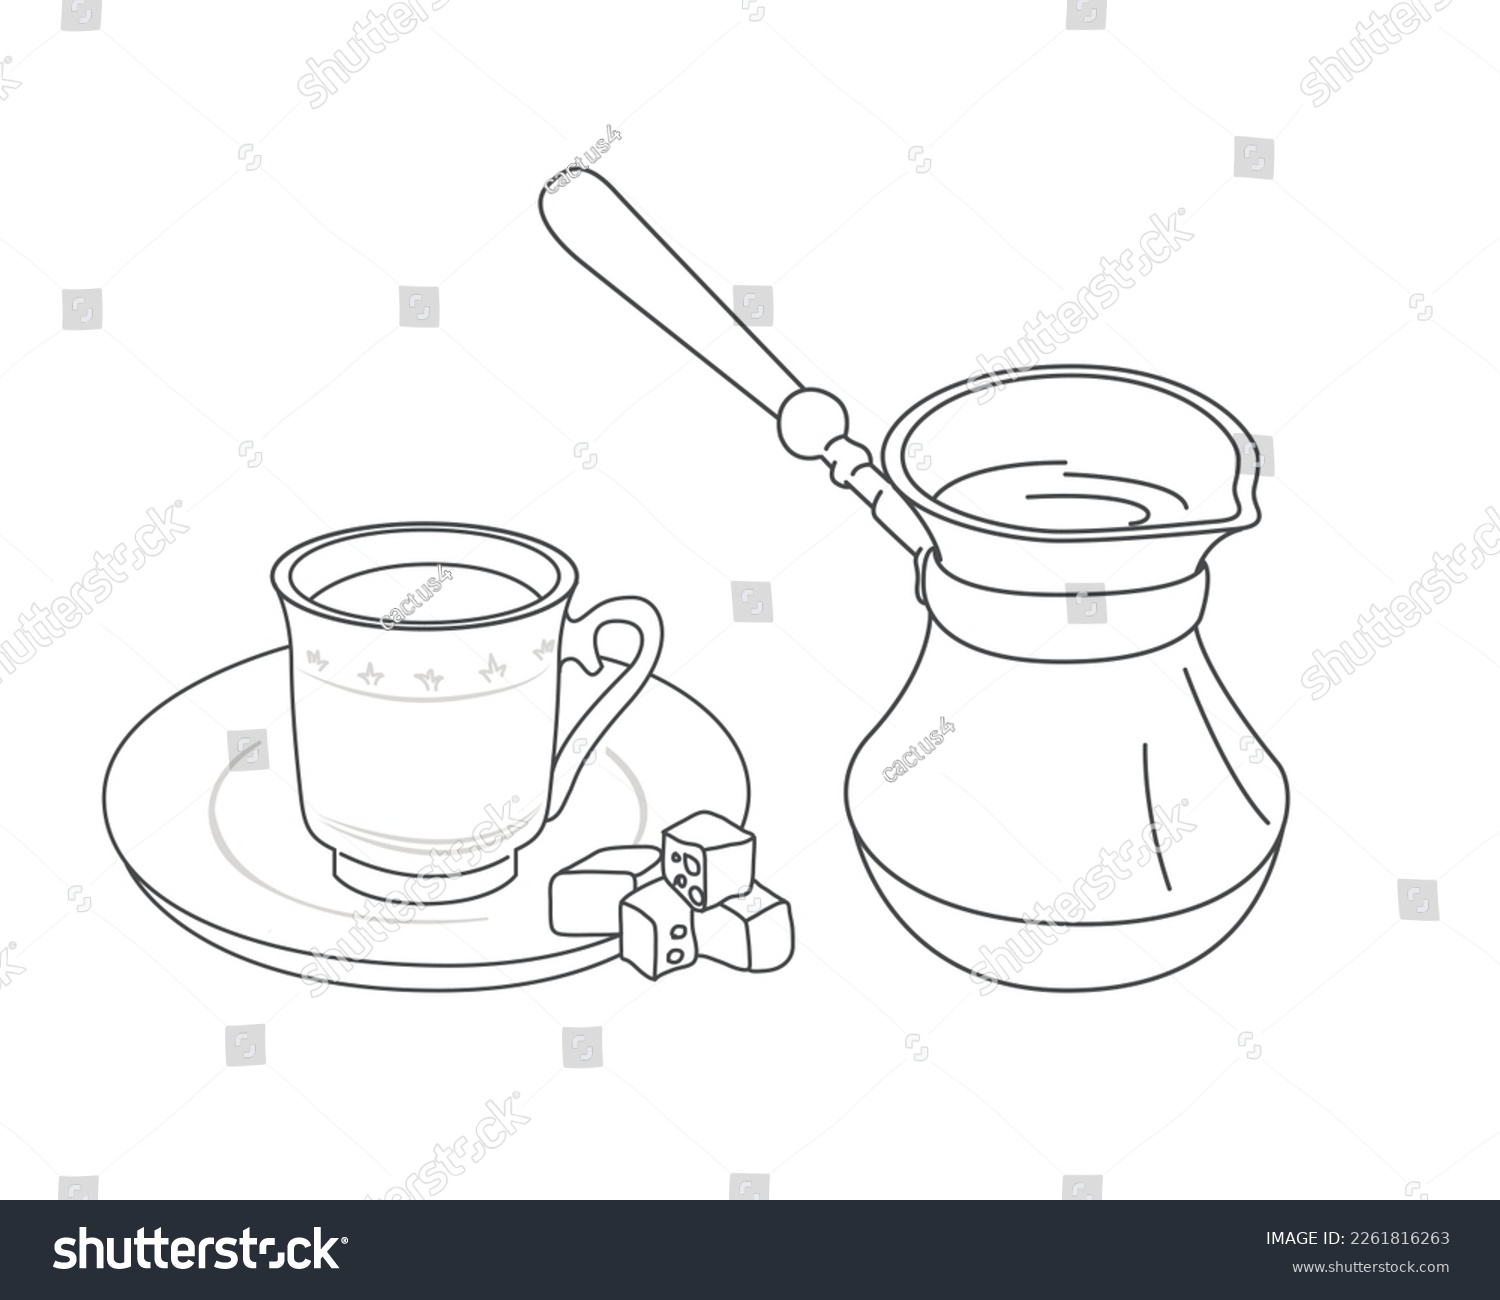 SVG of Drawn traditional Turkish coffee pot and cup vector illustration.  Turkish Coffee cup and Turkish delight svg